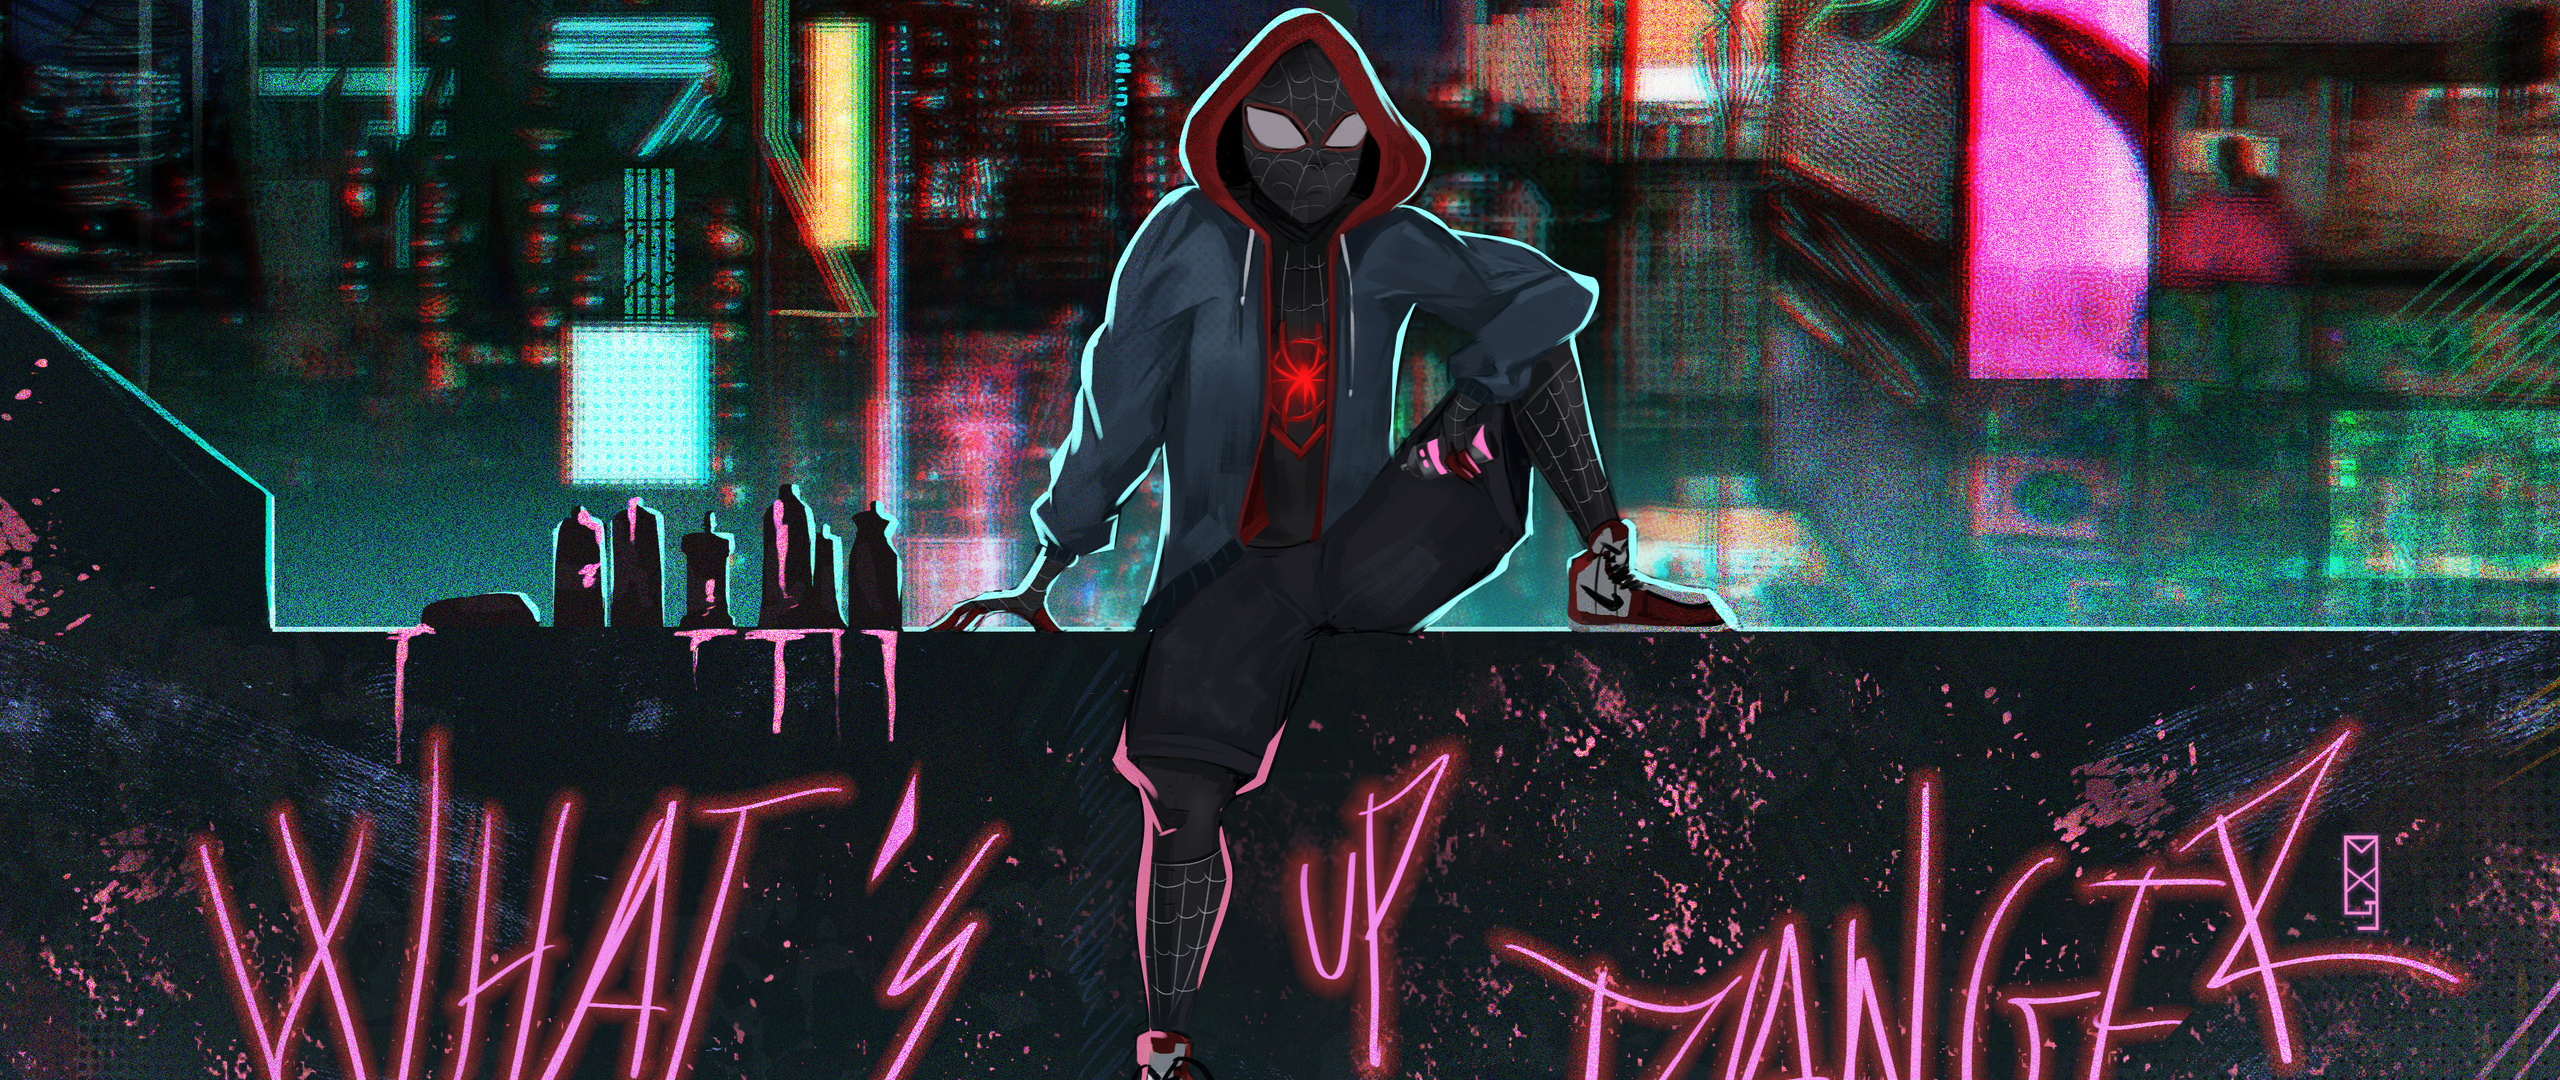 4k-wallpapers. hd-wallpapers. artist-wallpapers. spiderman-into-the-spider-verse...